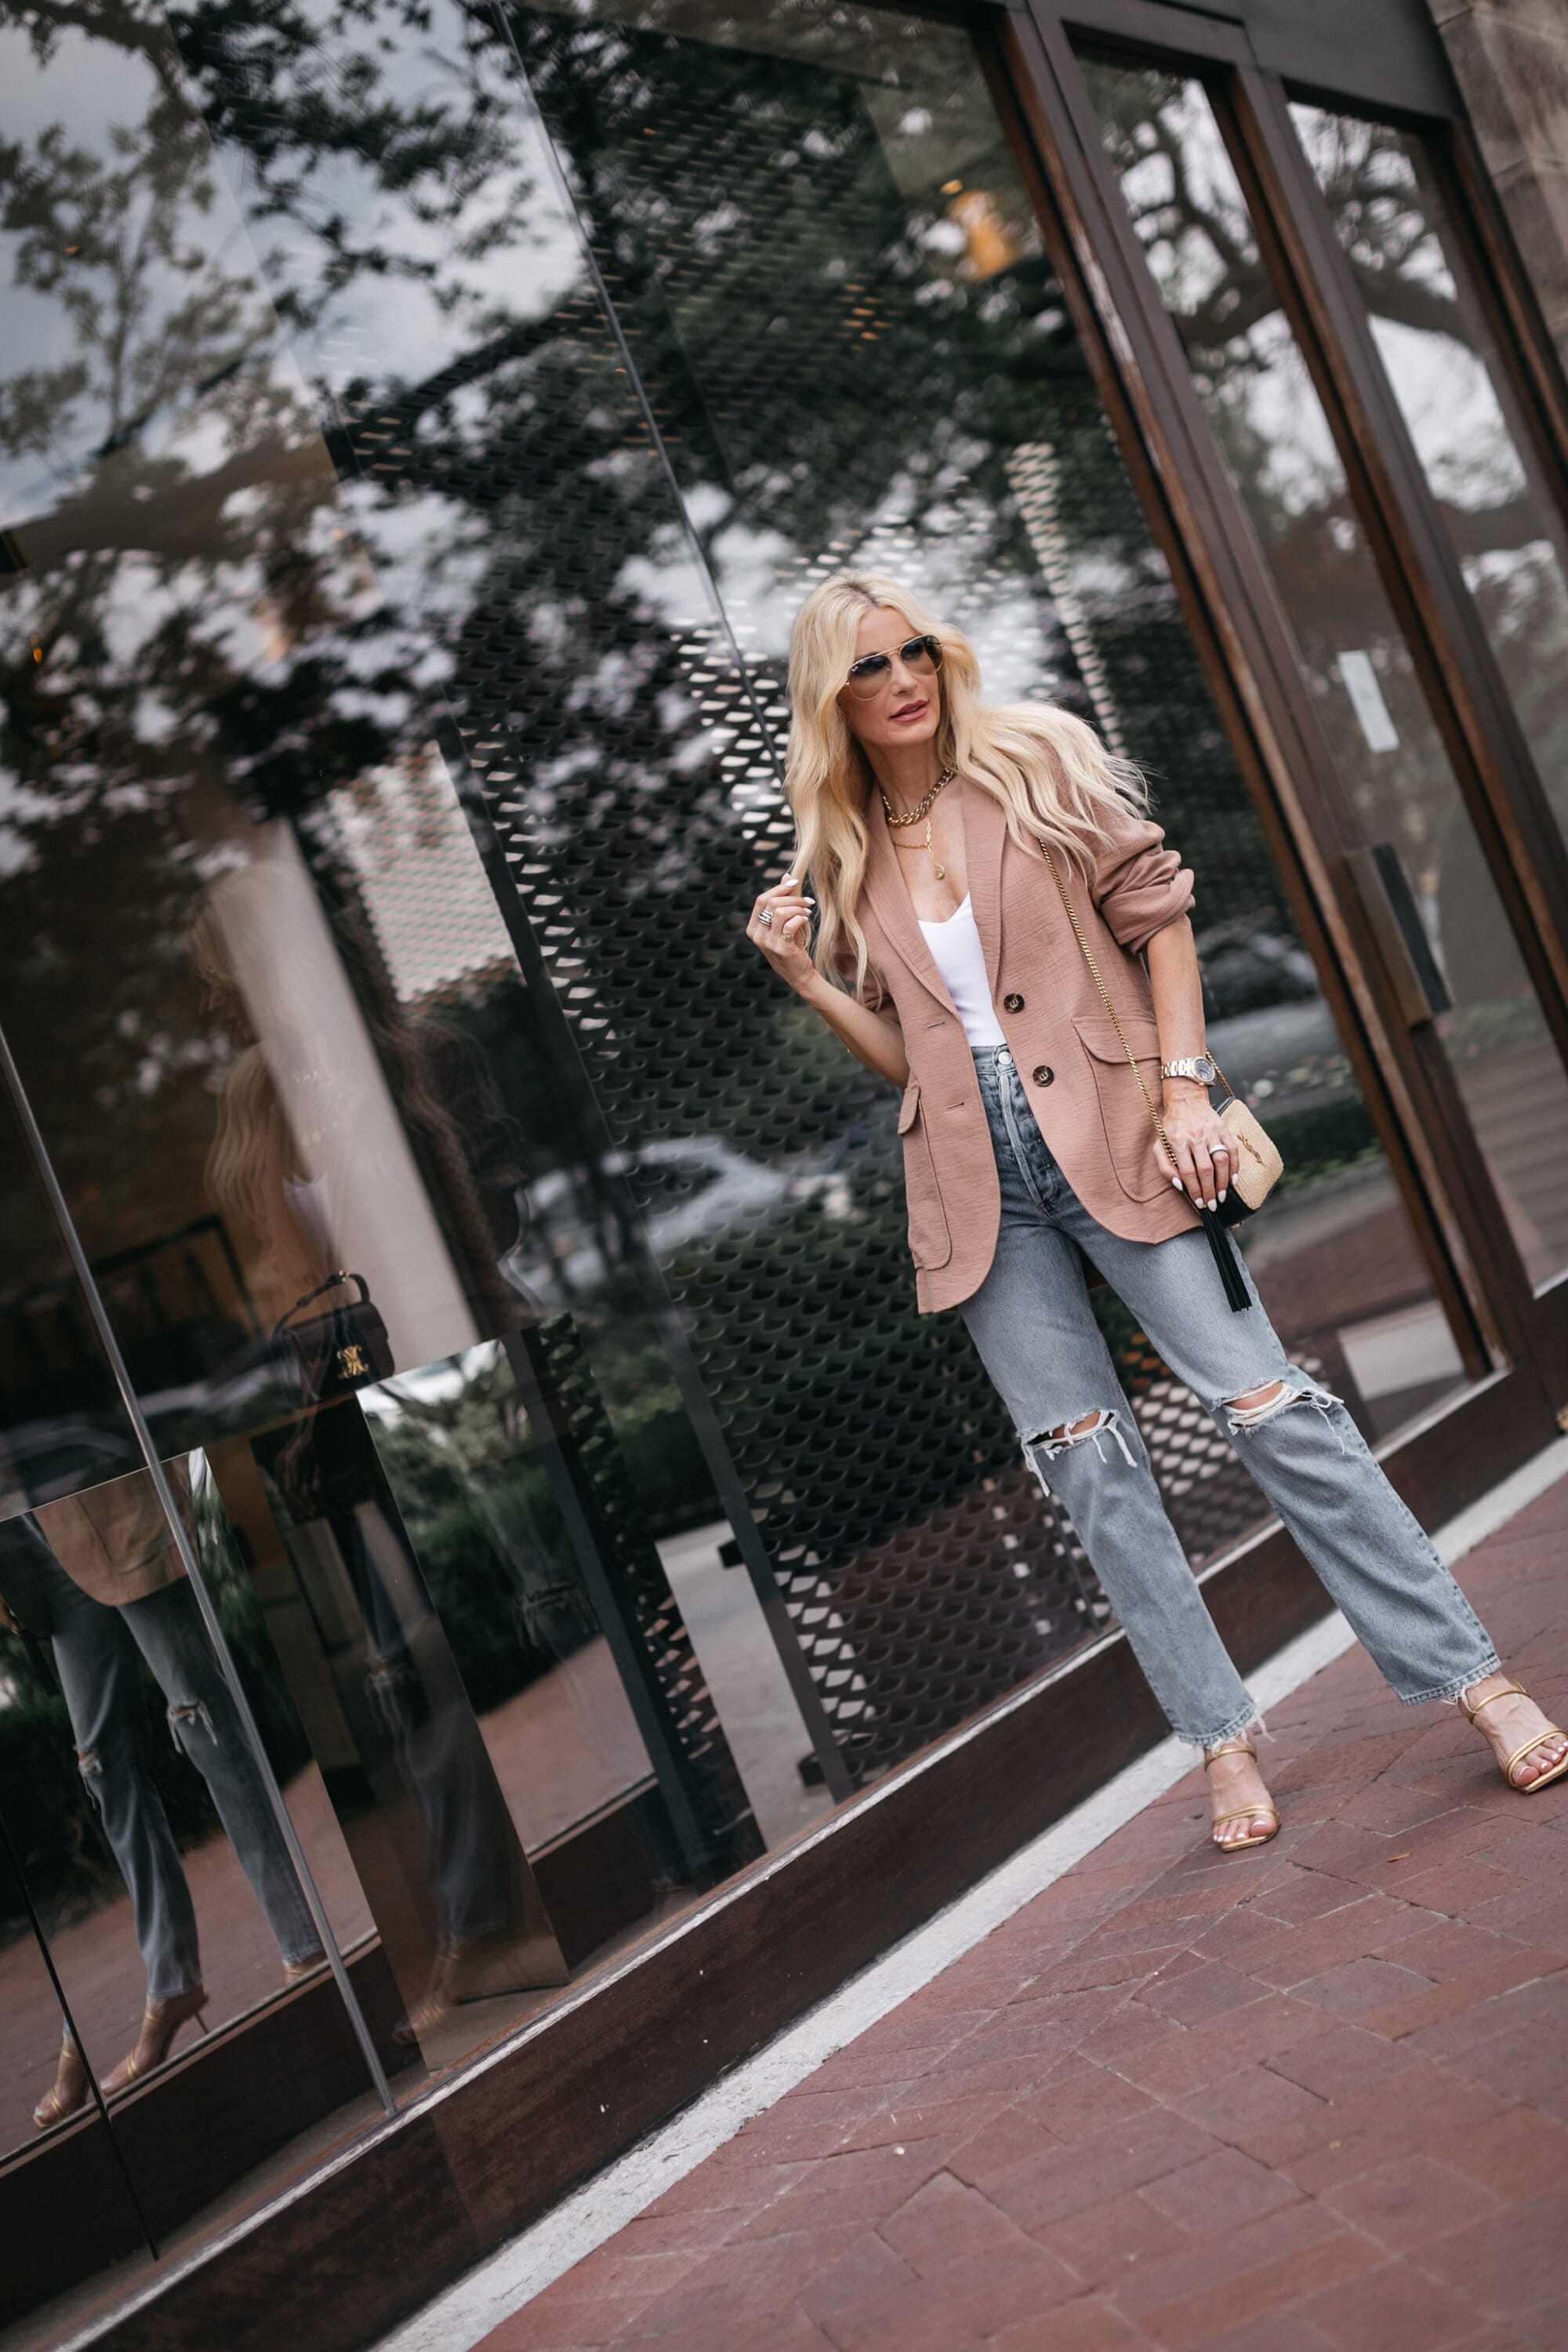 Dallas fashion blogger showcasing key transitional pieces for summer to fall